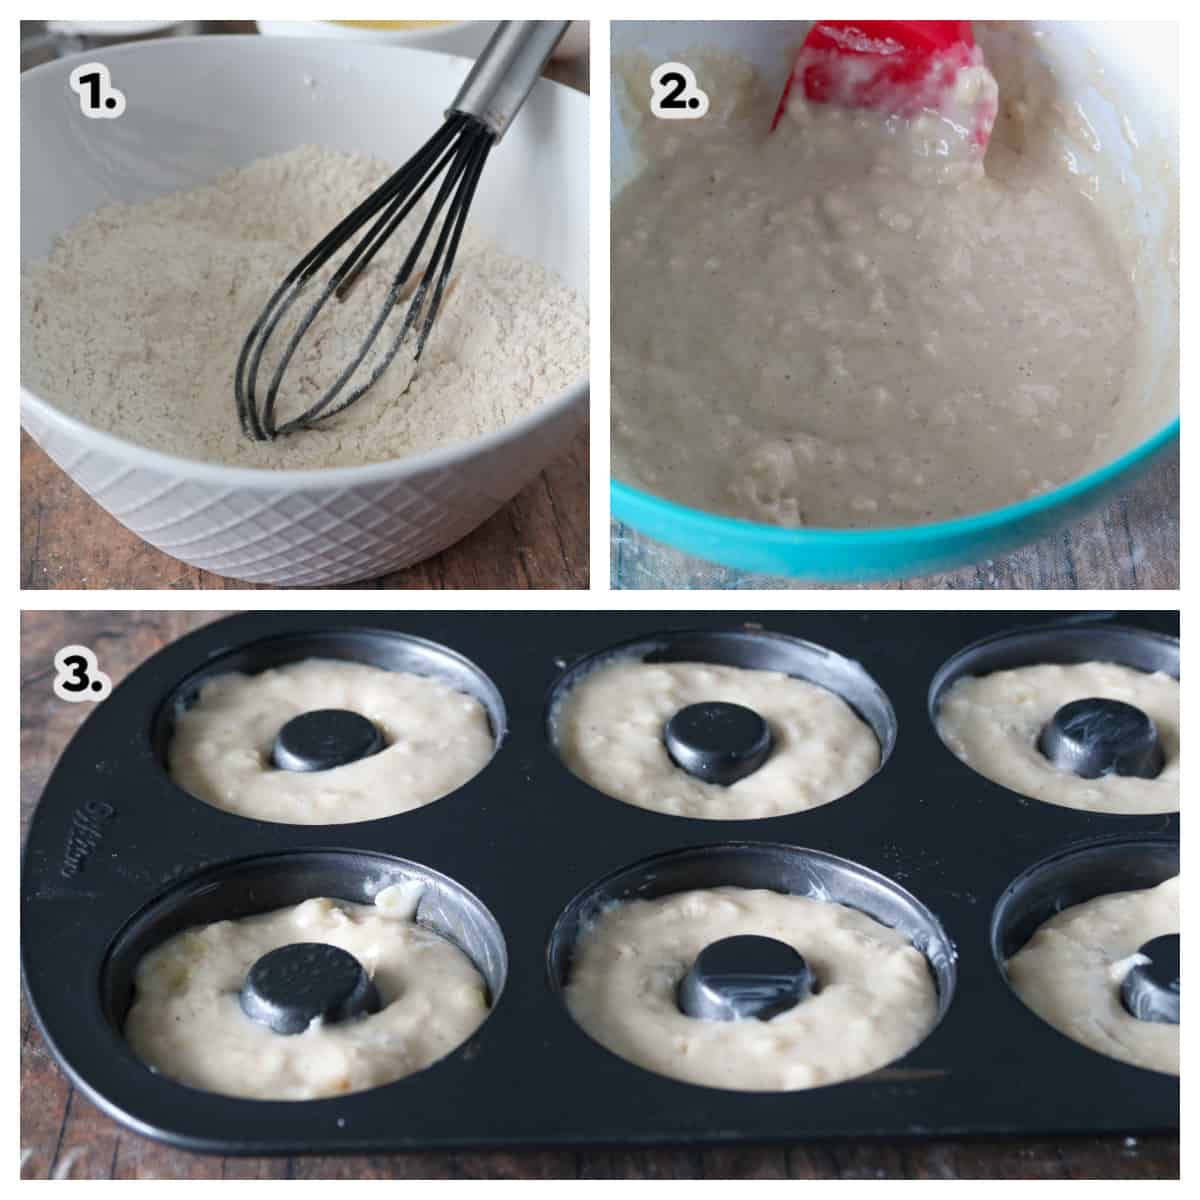 A collage showing the process of making the batter for the baked donuts.